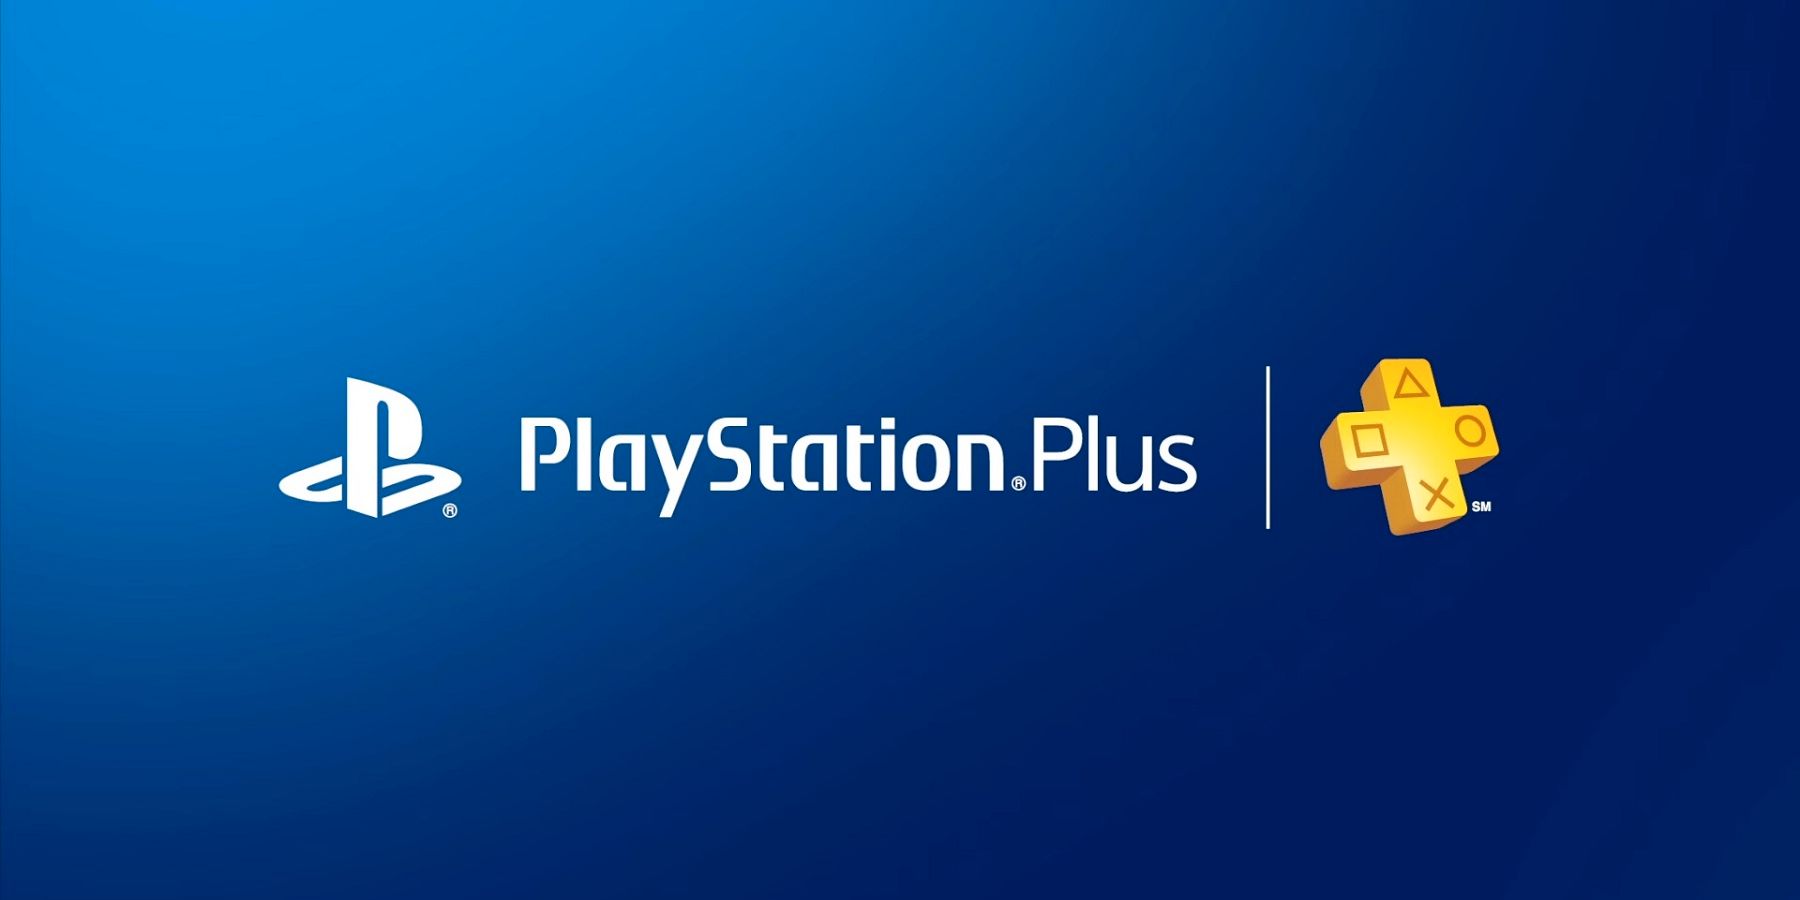 playstation plus free games get PS5 upgrade